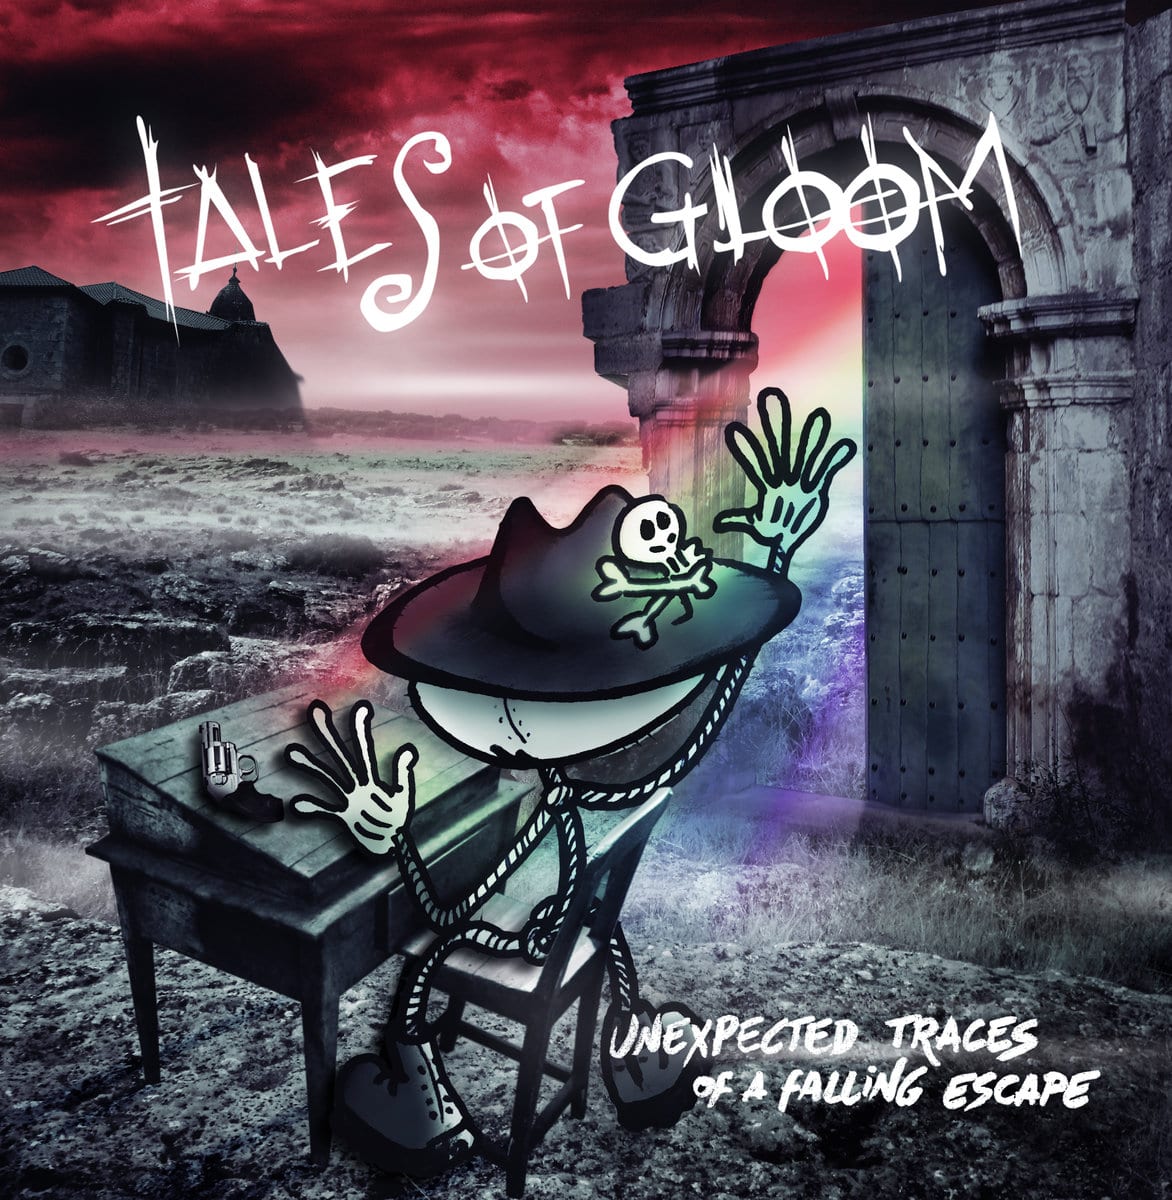 Tales of Gloom – Unexpected Traces of Falling Escape